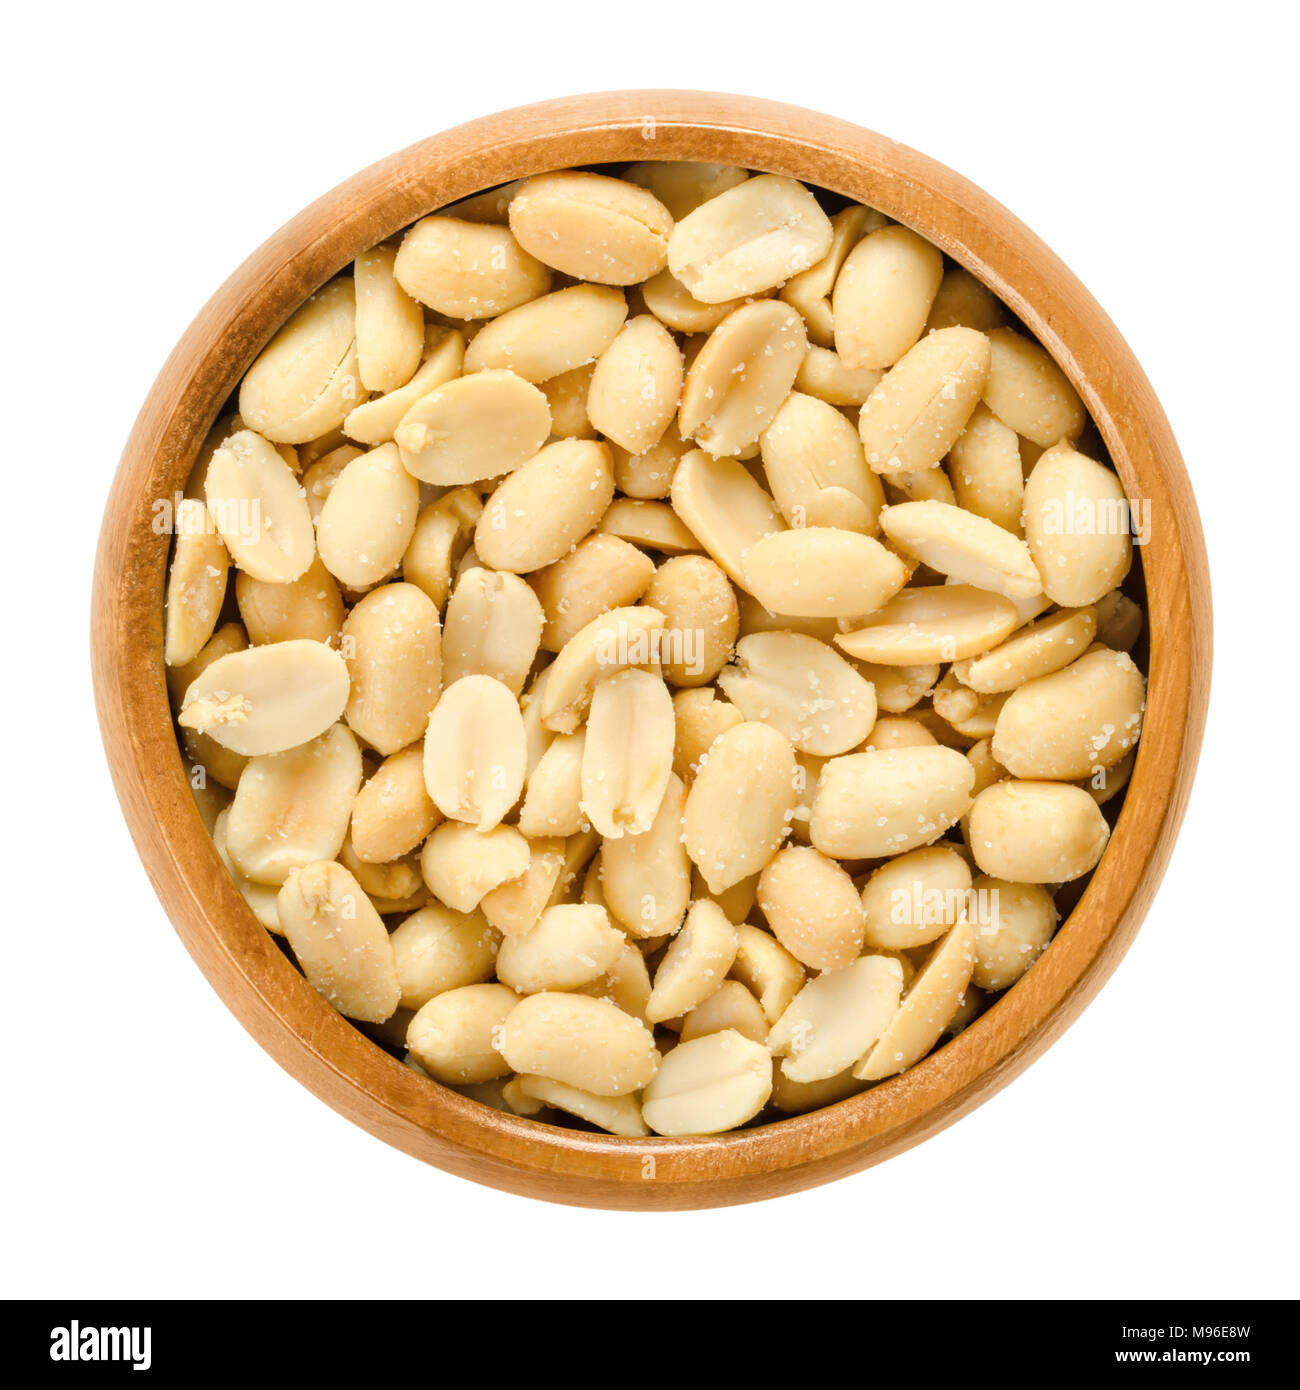 Peanuts, roasted and salted, in wooden bowl. Shelled Arachis hypogaea, also called groundnut and goober, used as a snack. Stock Photo